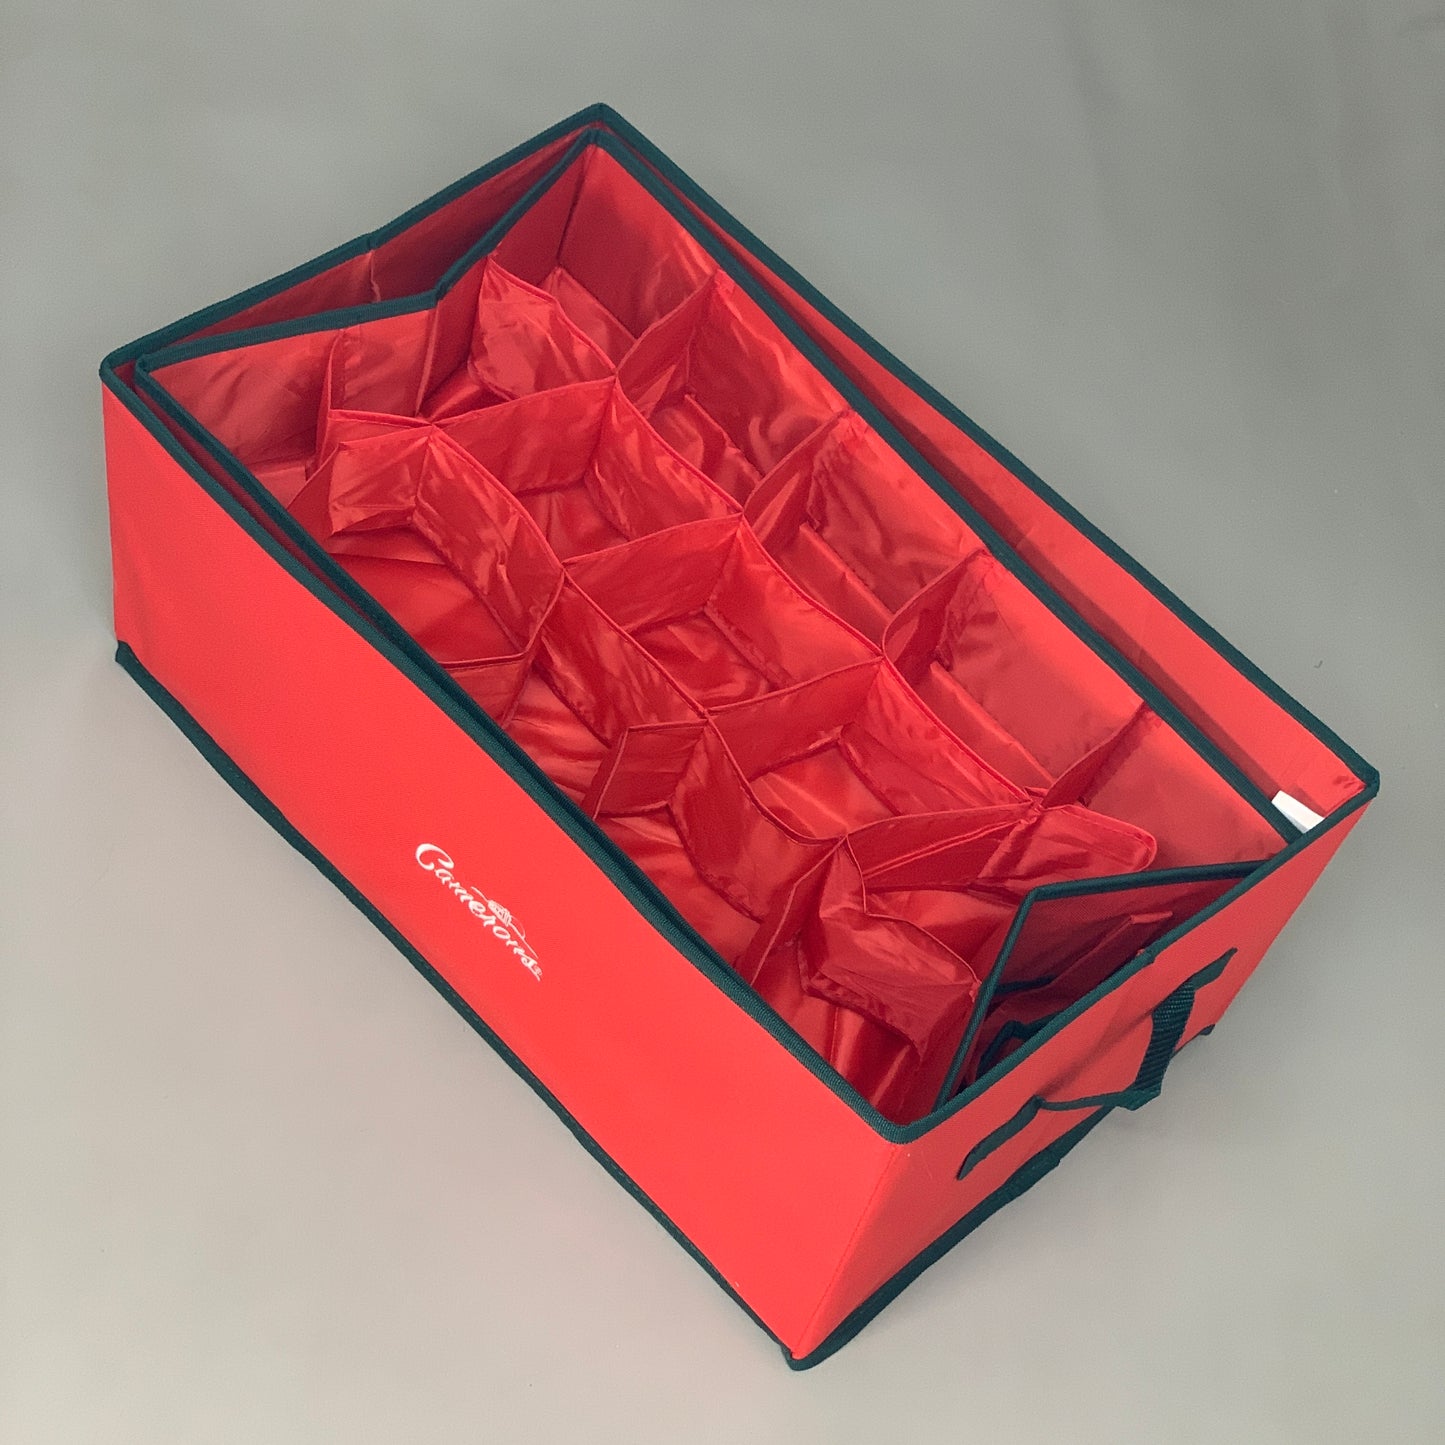 ZA@ CAMERONS Ornament Storage Box With Removable Trays 22.5" x 13.5" x 10" Red (New)